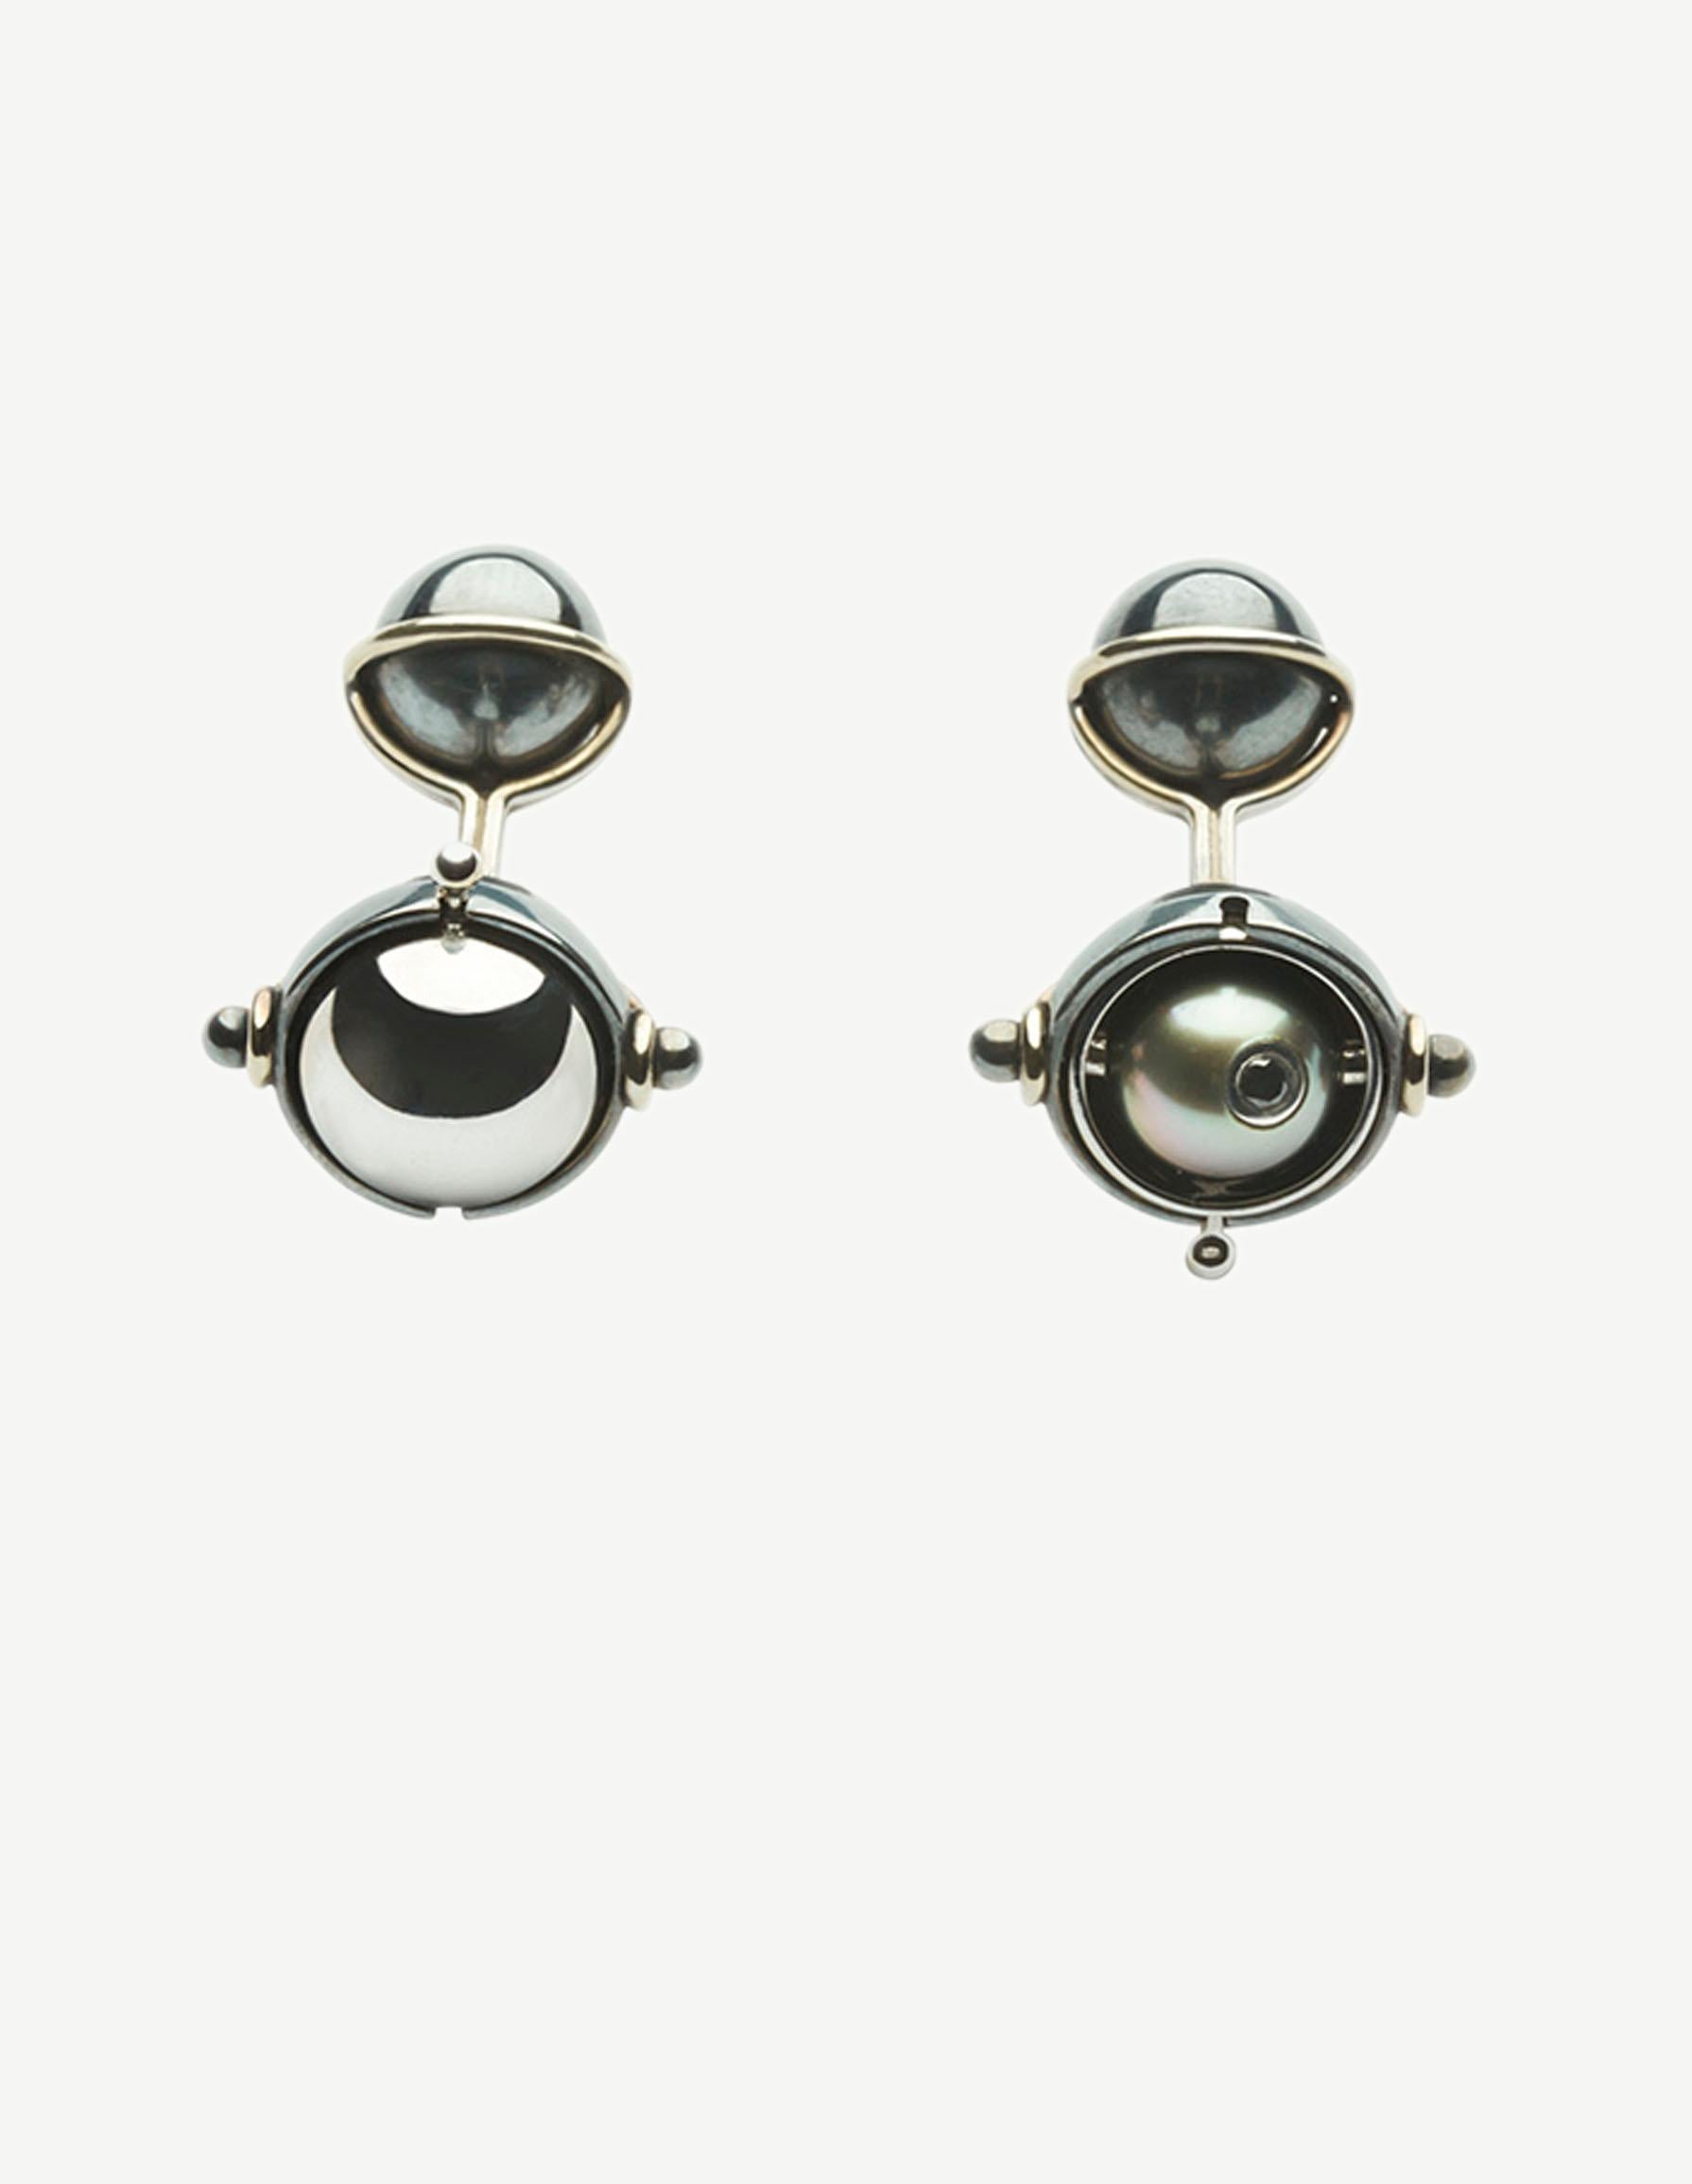 Diamonds Cufflinks set with Tahitian Pearls in 18k white gold by Elie Top. 18K White Gold Distressed Silver Cufflinks. Rotating half-spheres opening on a tahiti pearl encrusted with a diamond.